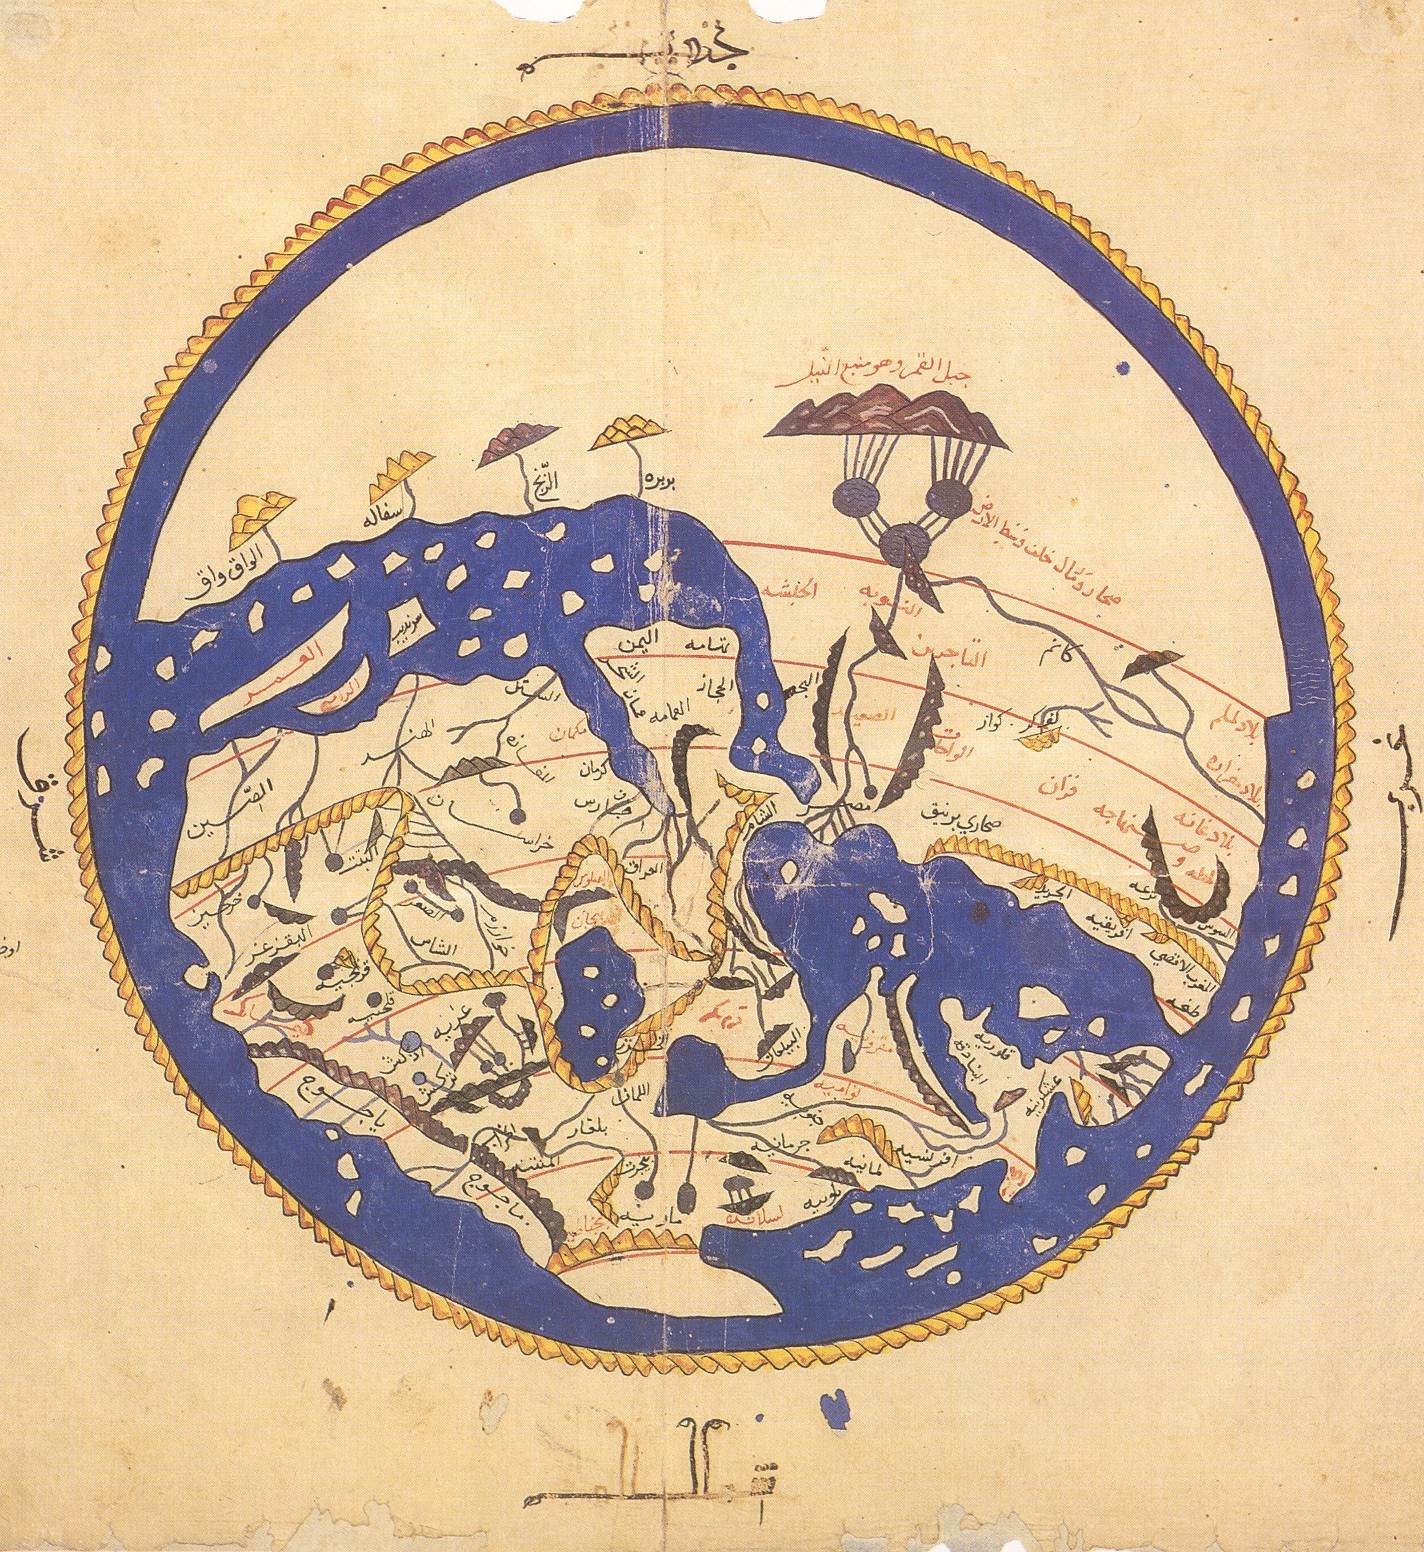 Mounts of Qaf surrounds the world according to Idrisse's map (1100 – 1165). Source: Wikipedia 